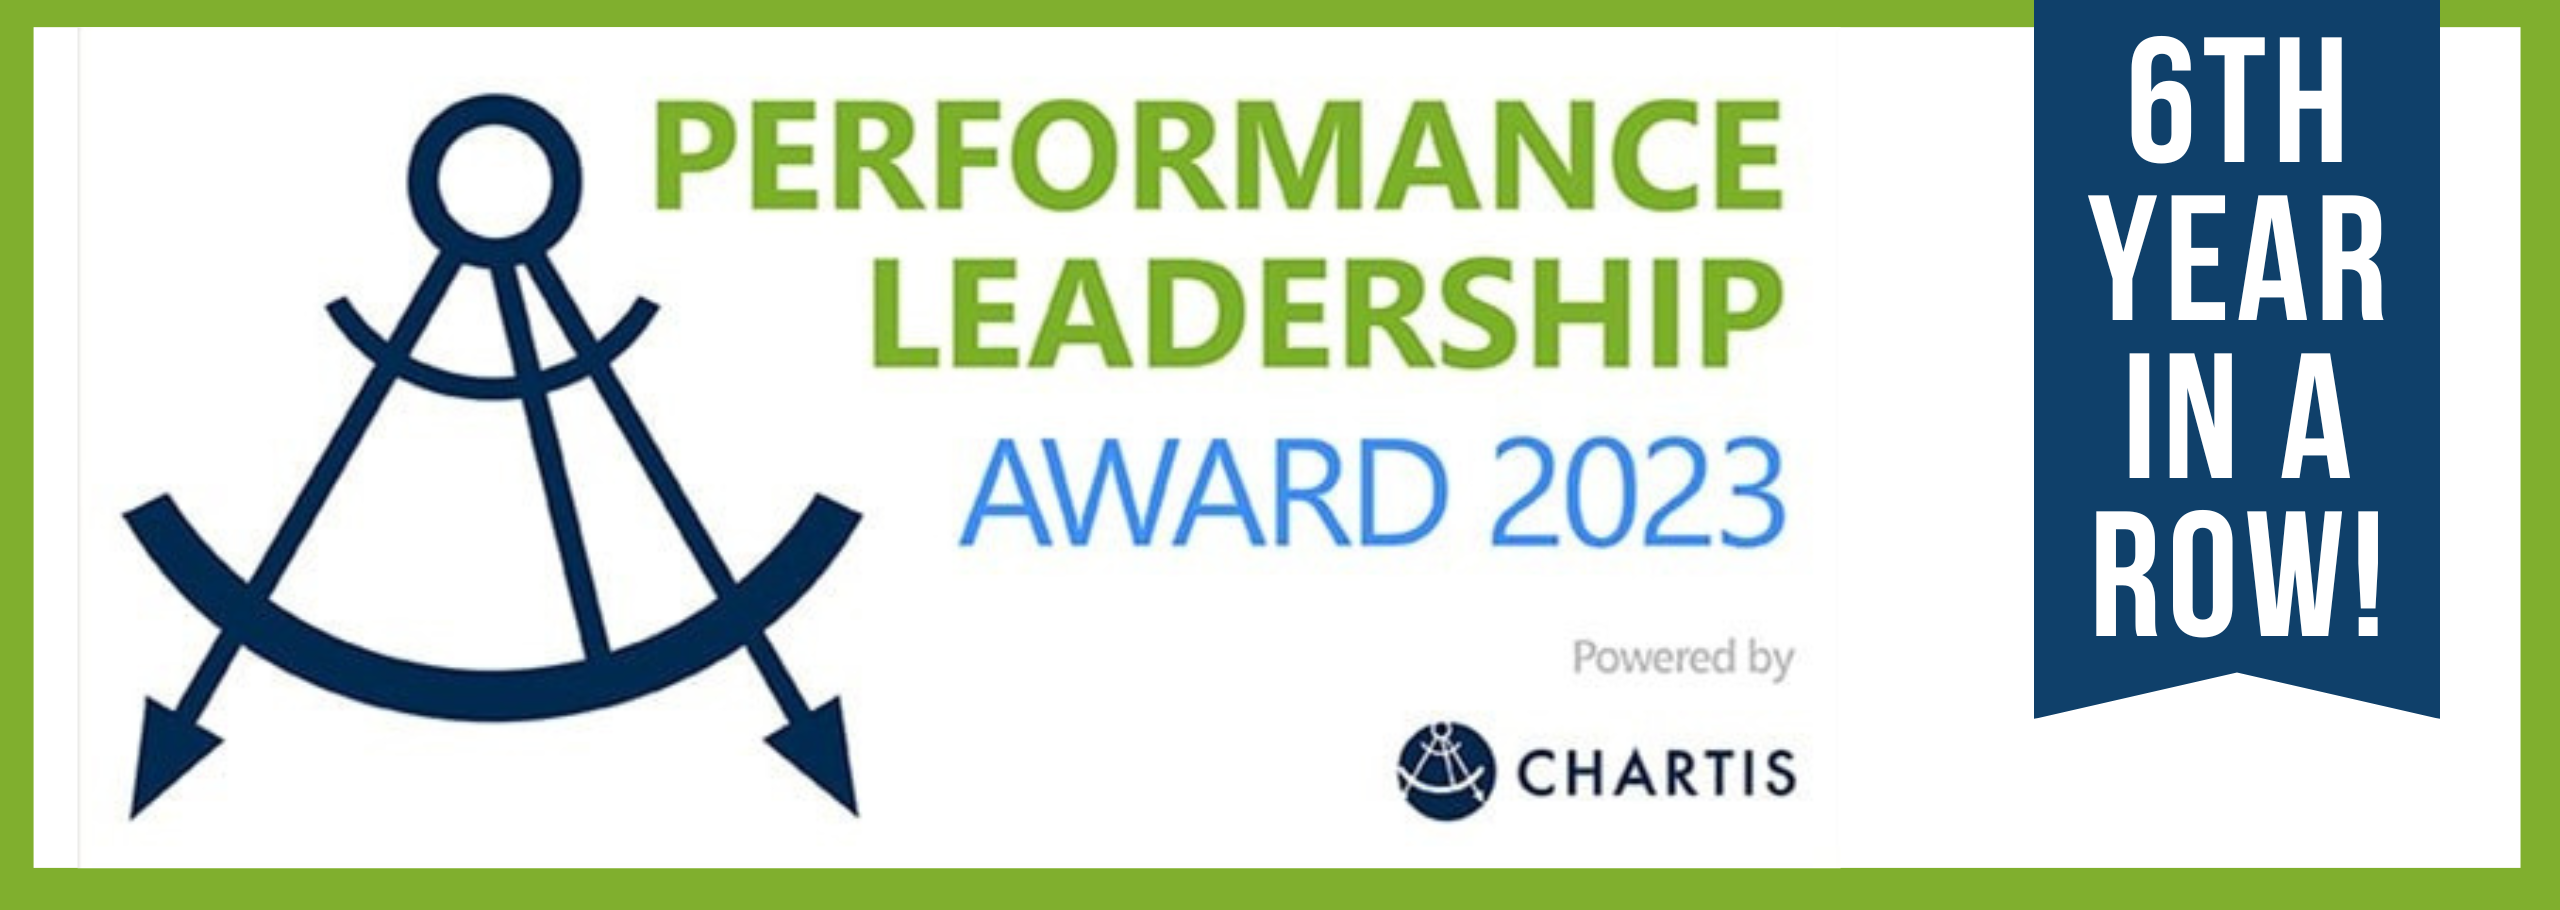 PERFORMANCE LEADERSHIP
AWARD 2023
POWERED BY CHARTIS
6TH YEAR IN A ROW!